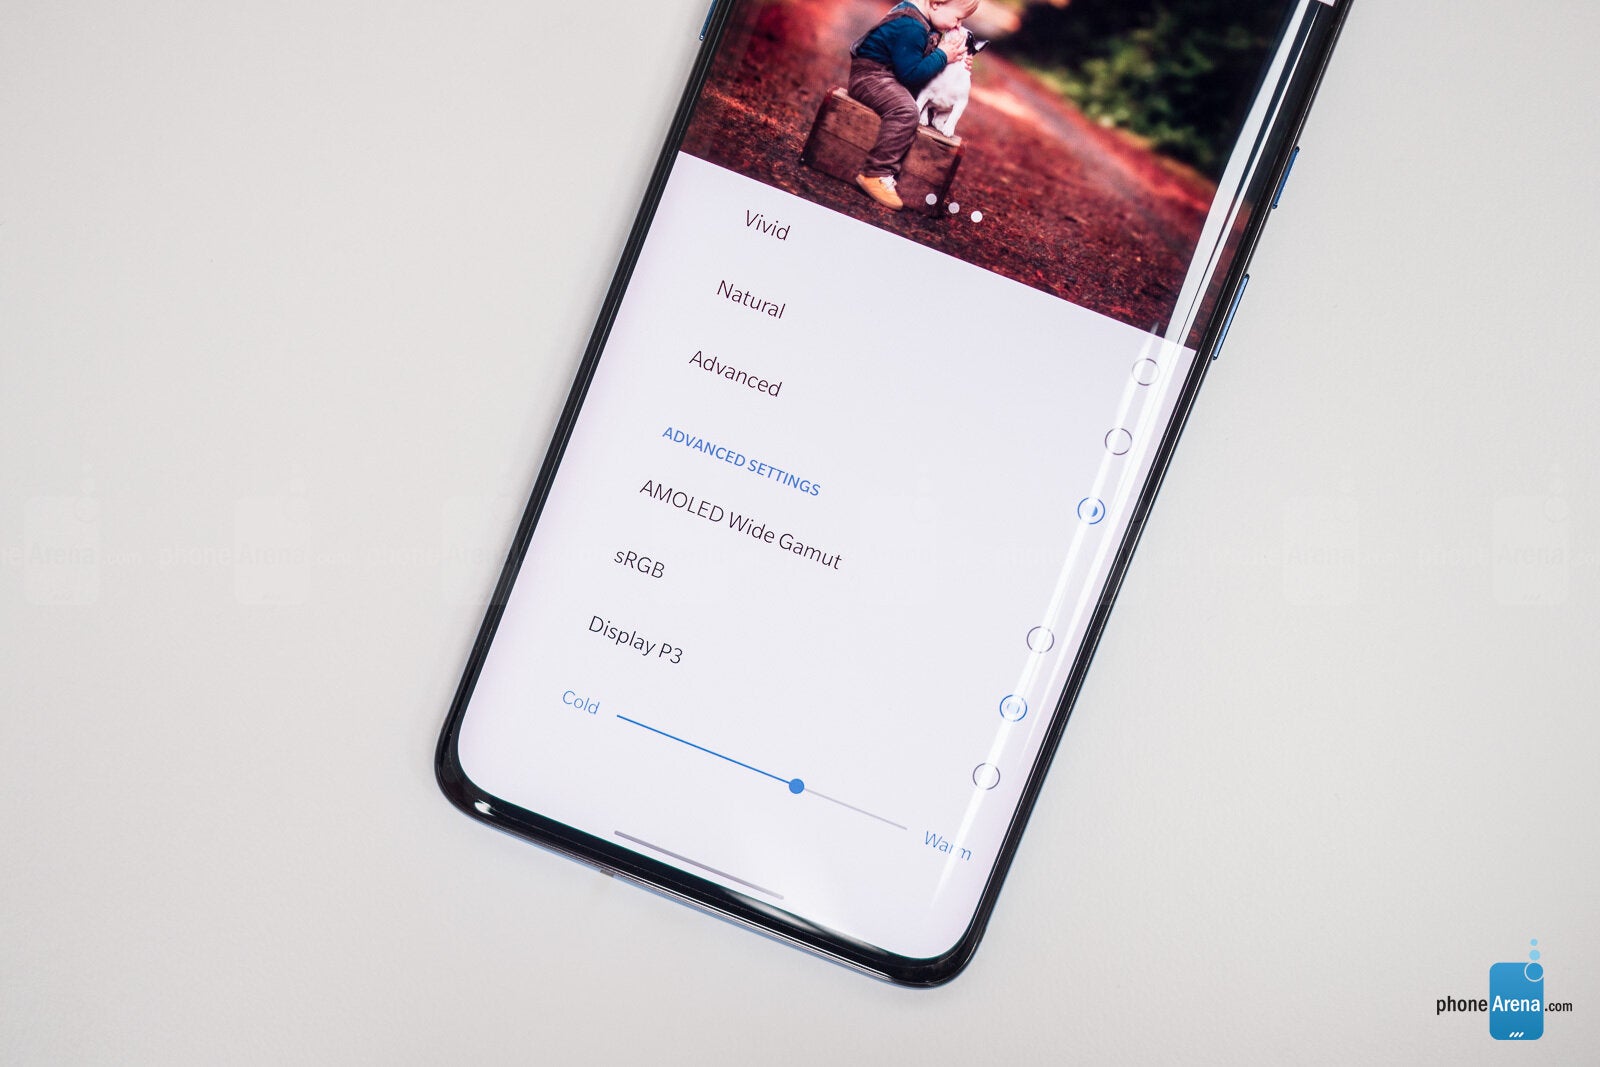 OnePlus 7T Pro Review